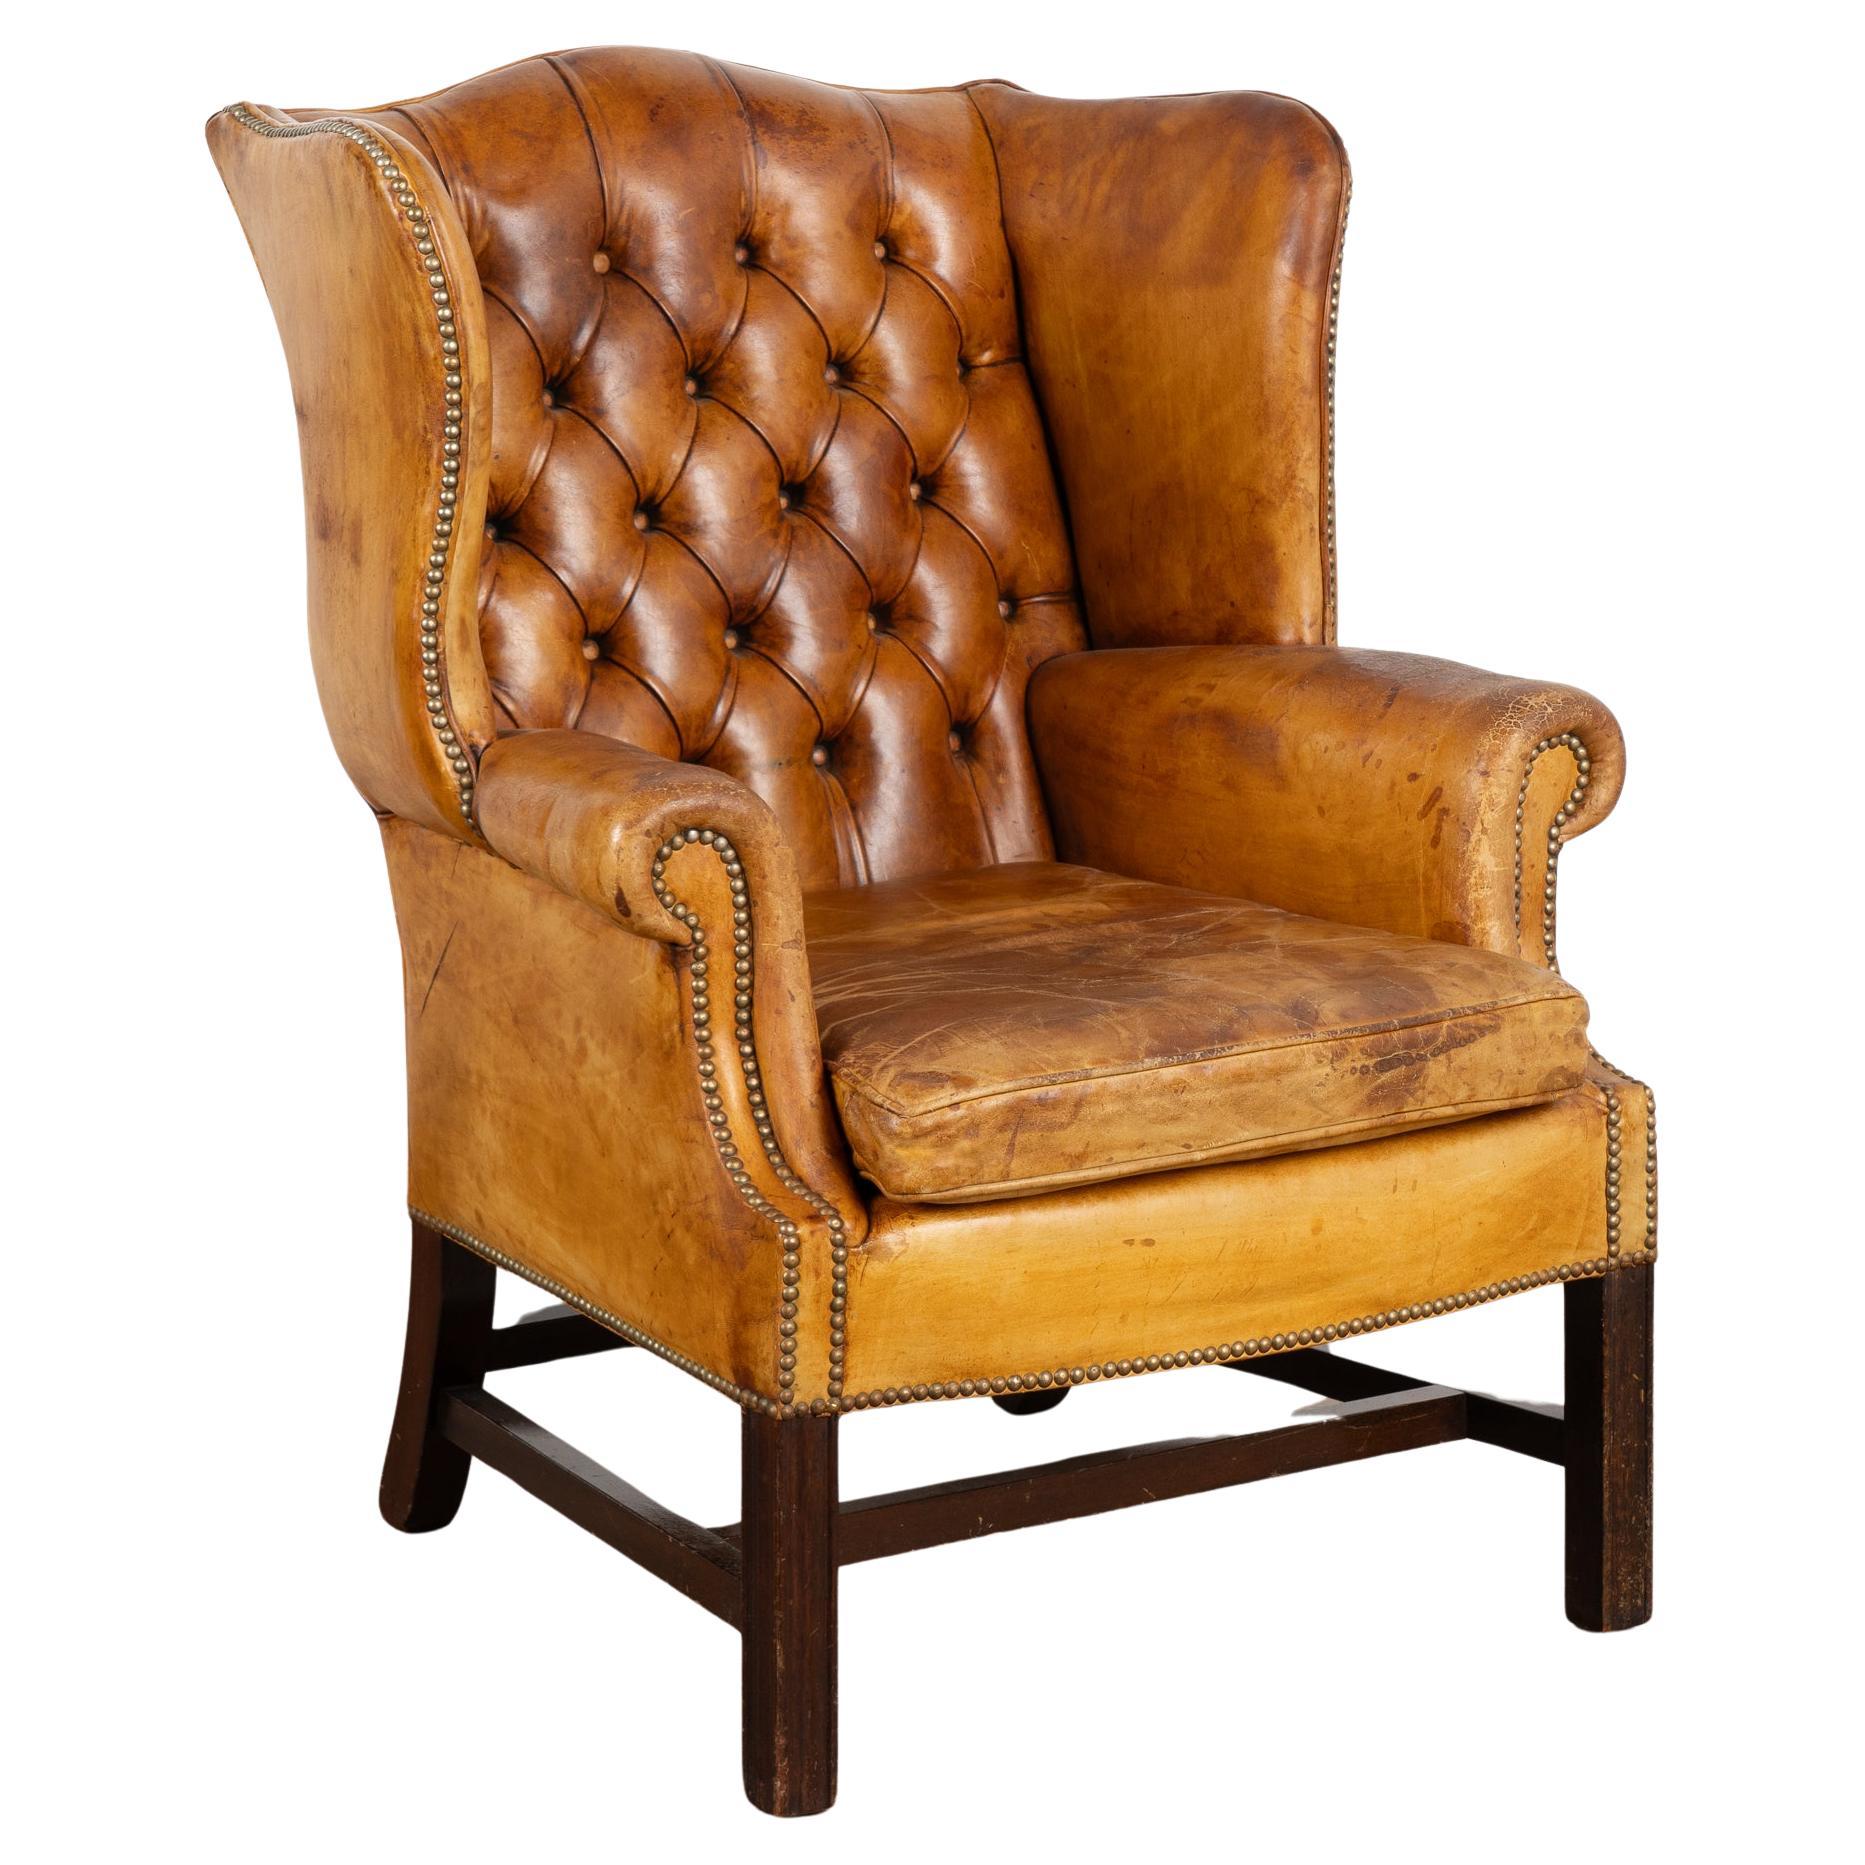 Vintage Brown Leather Wingback Chesterfield Arm Chair, England circa 1940 For Sale